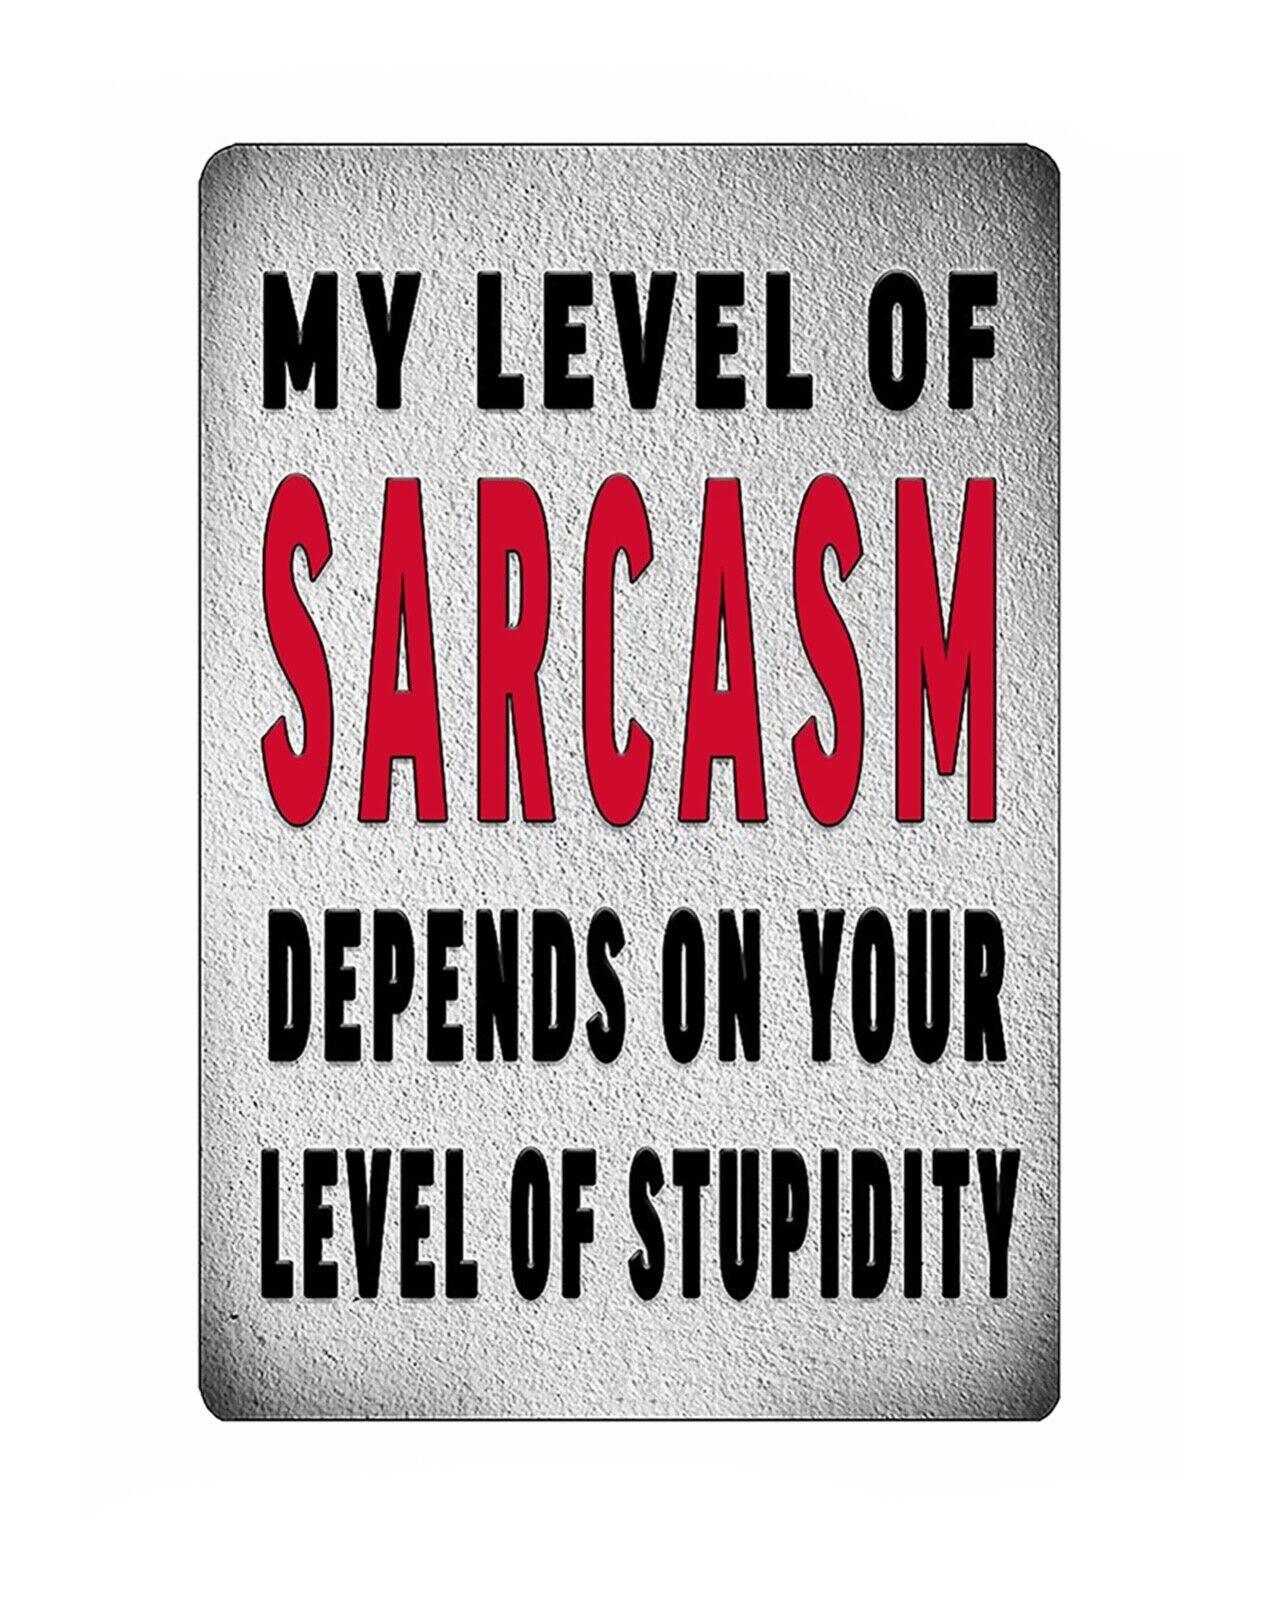 MY LEVEL OF SARCASM DEPENDS ON YOUR LEVEL OF STUPIDITY STICKER 3.5 X 5